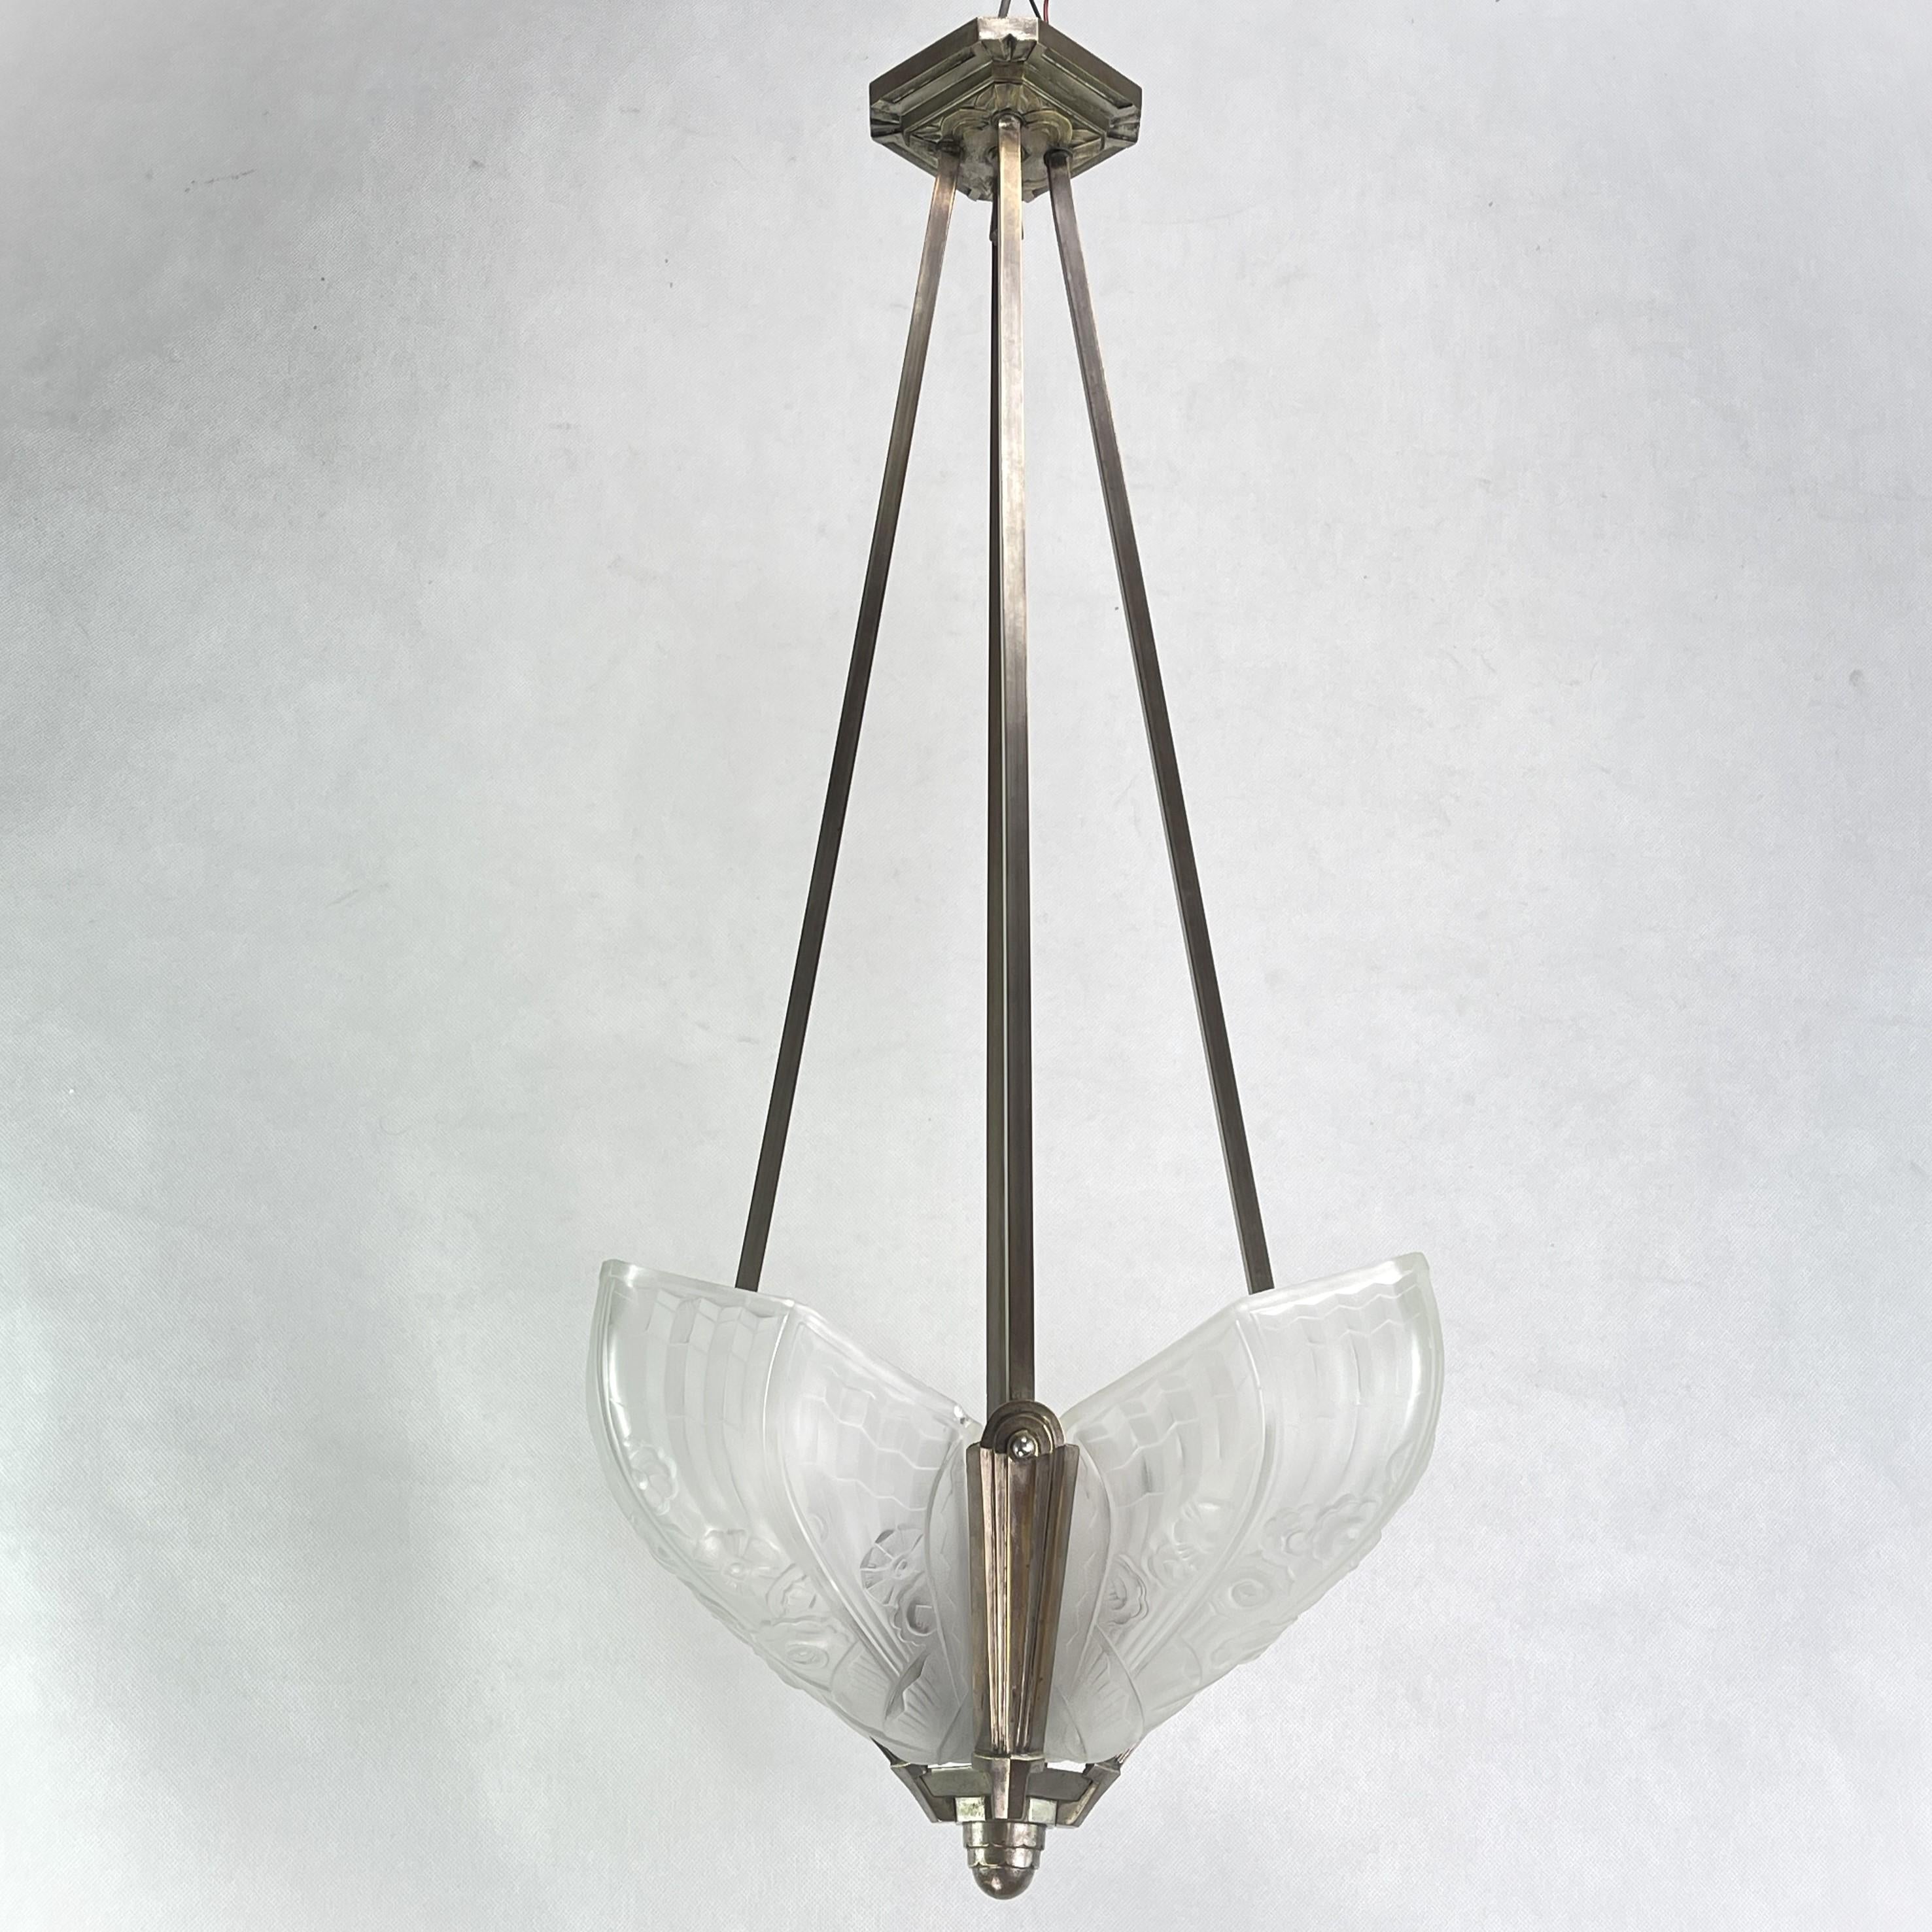 Art Deco Chandelier by Jean Gauthier

This stunning 1930s Art Deco chandelier is an outstanding example of the elegance and sophistication of the Art Deco style. With its combination of metal and glass, this chandelier embodies the glamor and